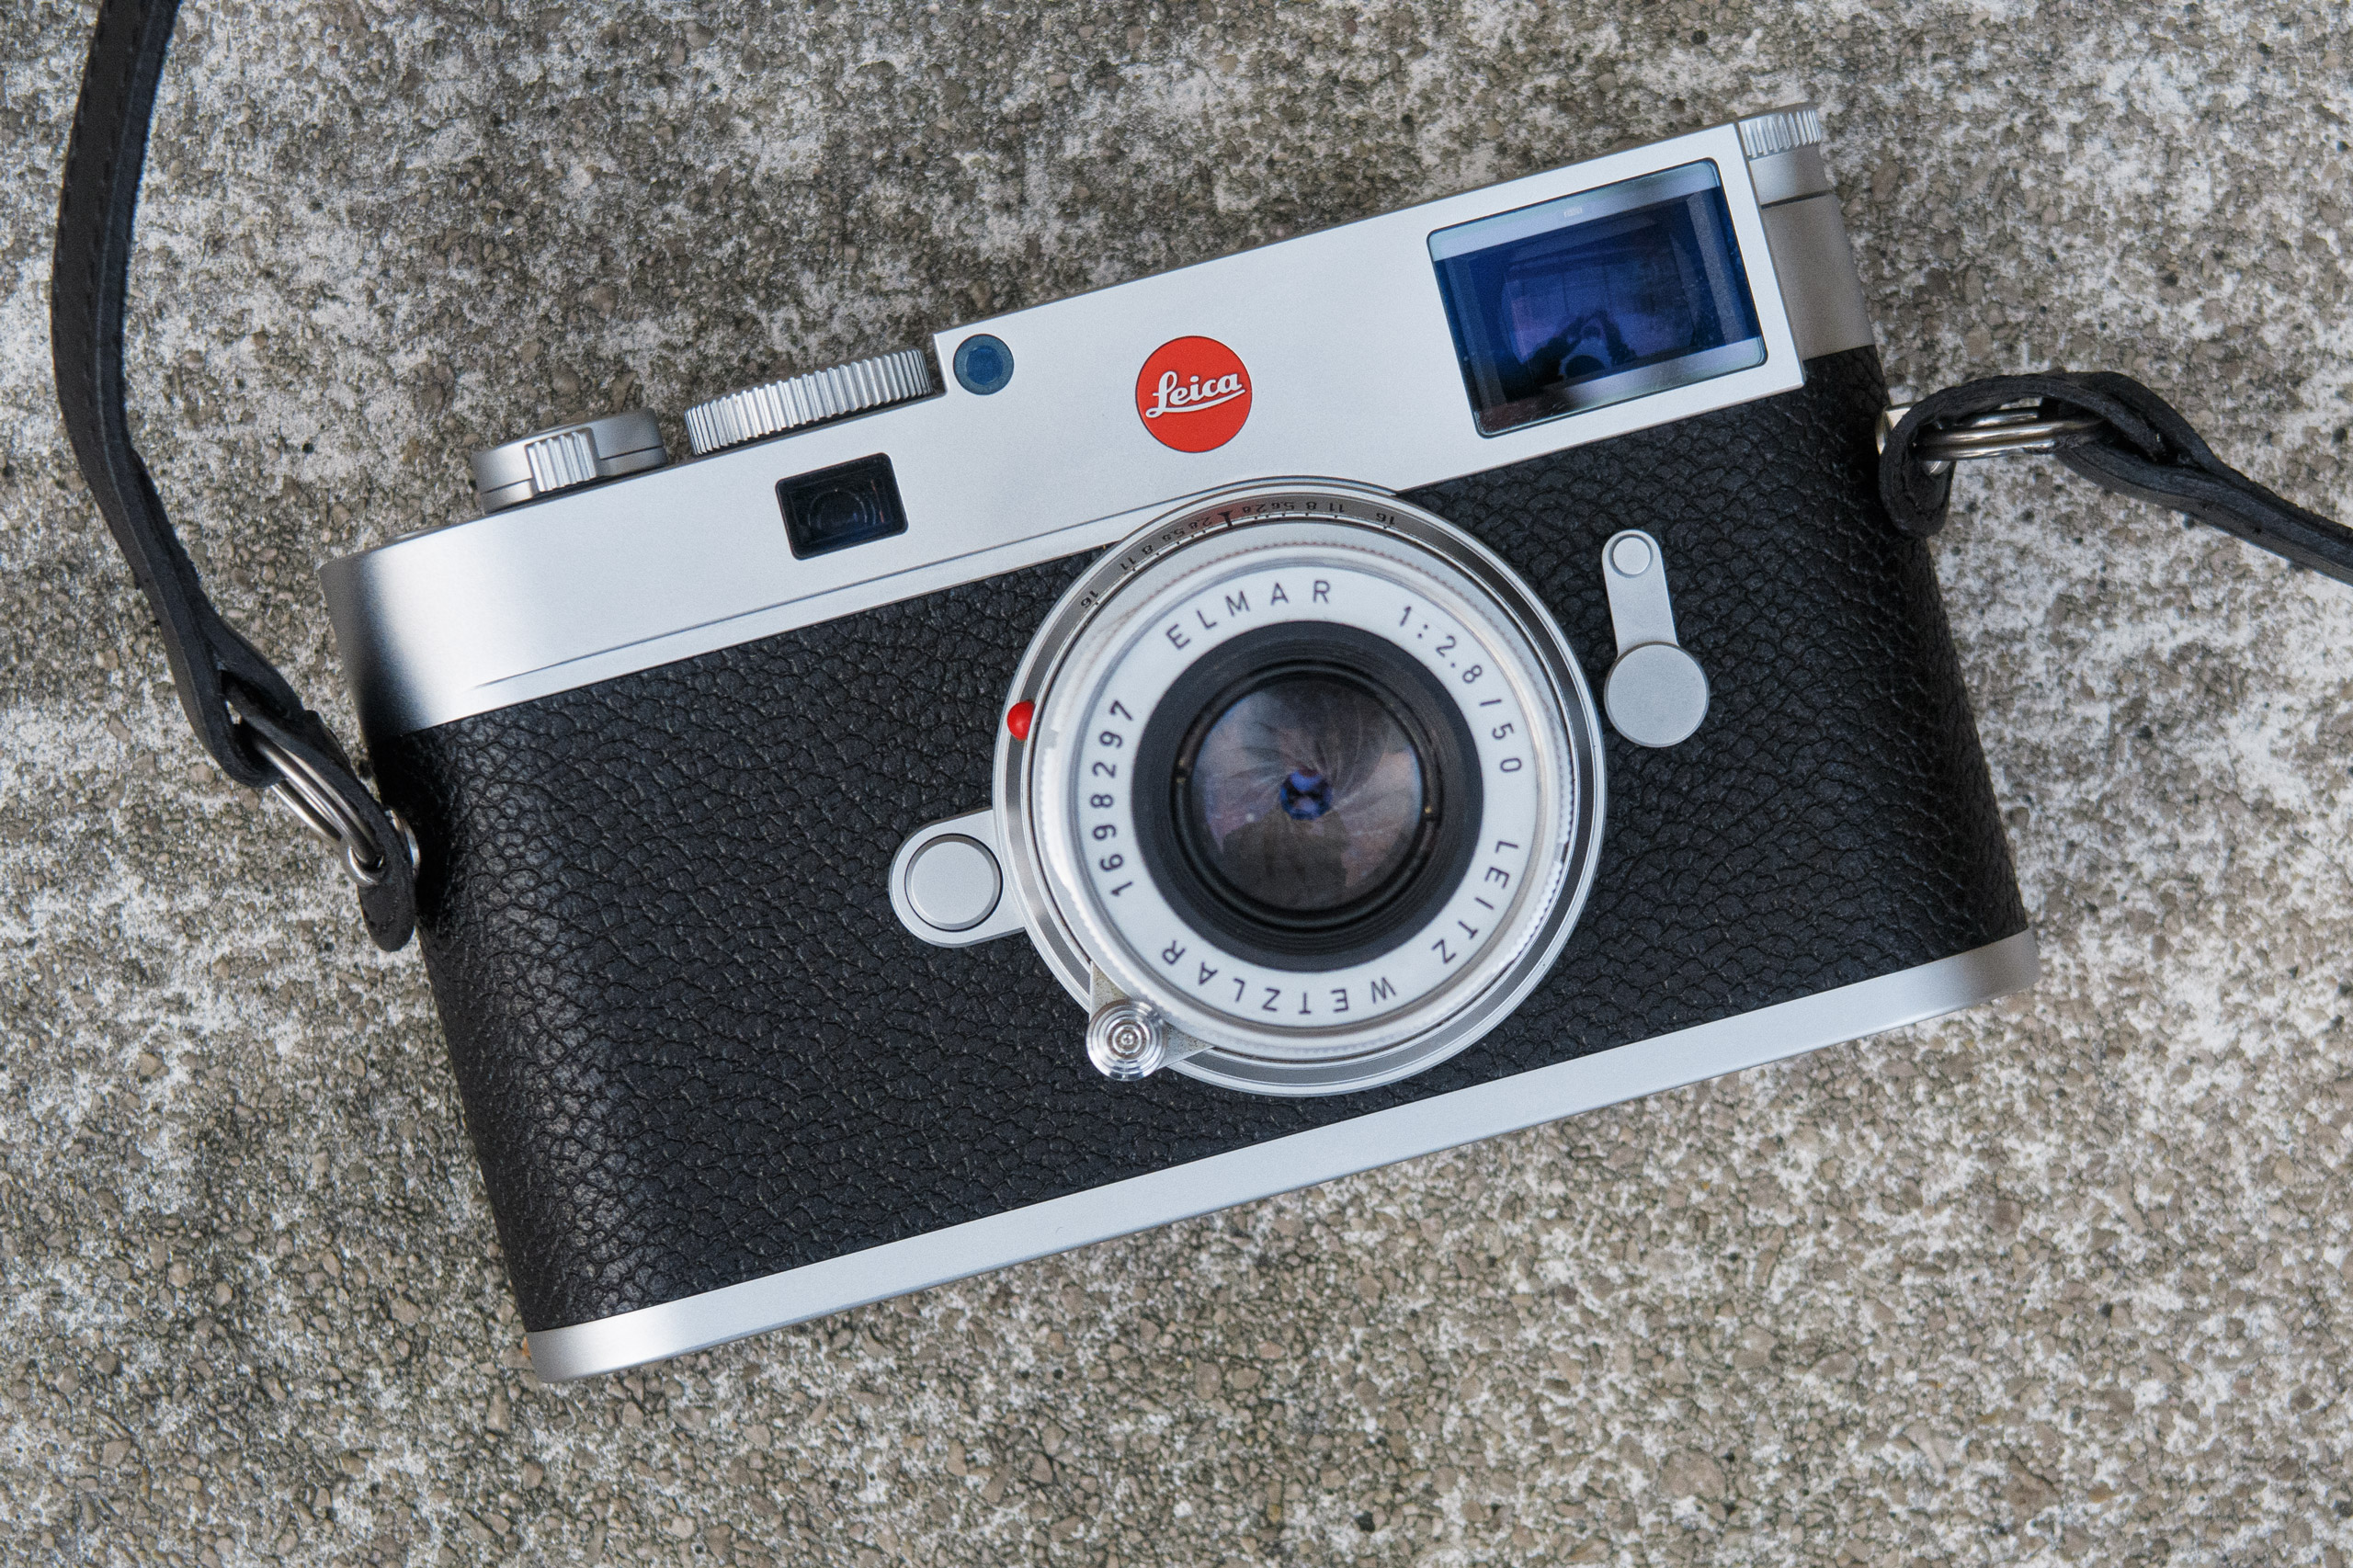 The M U want: Leica M10 First Impressions Review and Samples